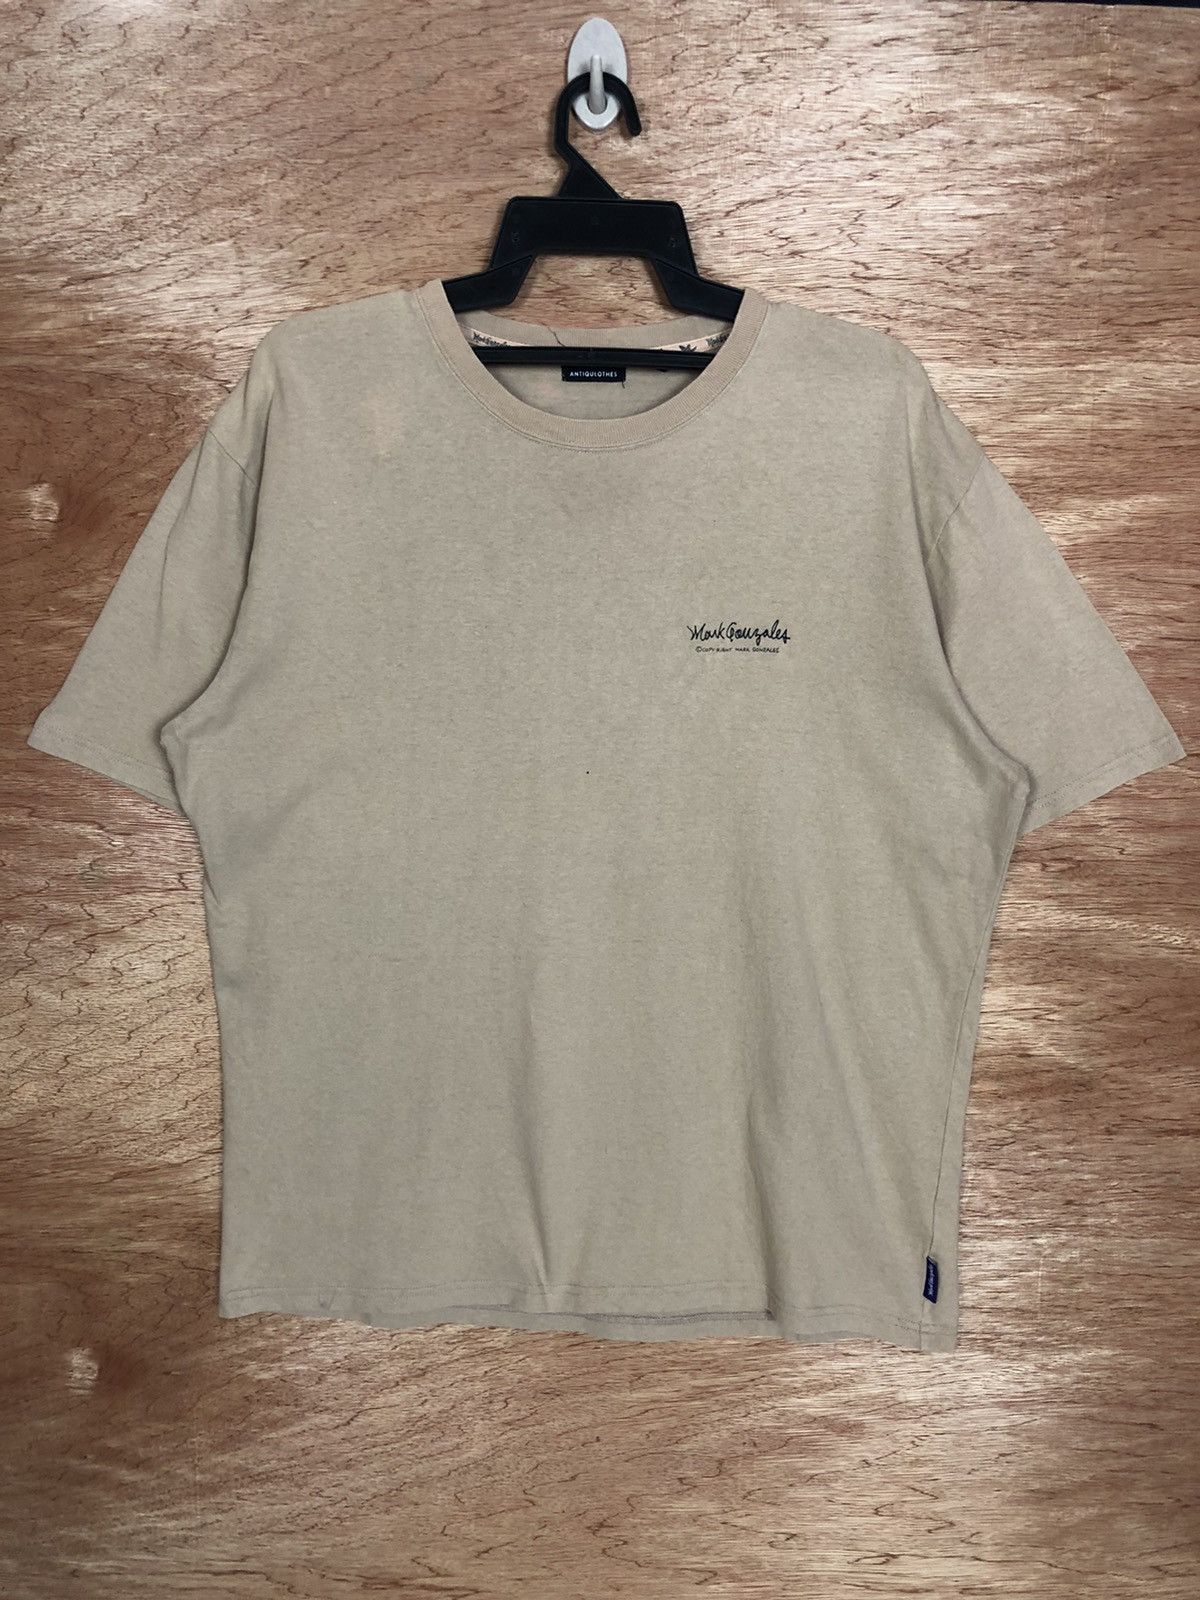 Japanese Brand Mark Gonzales With Antiqulothes Overprint Design Size US L / EU 52-54 / 3 - 2 Preview